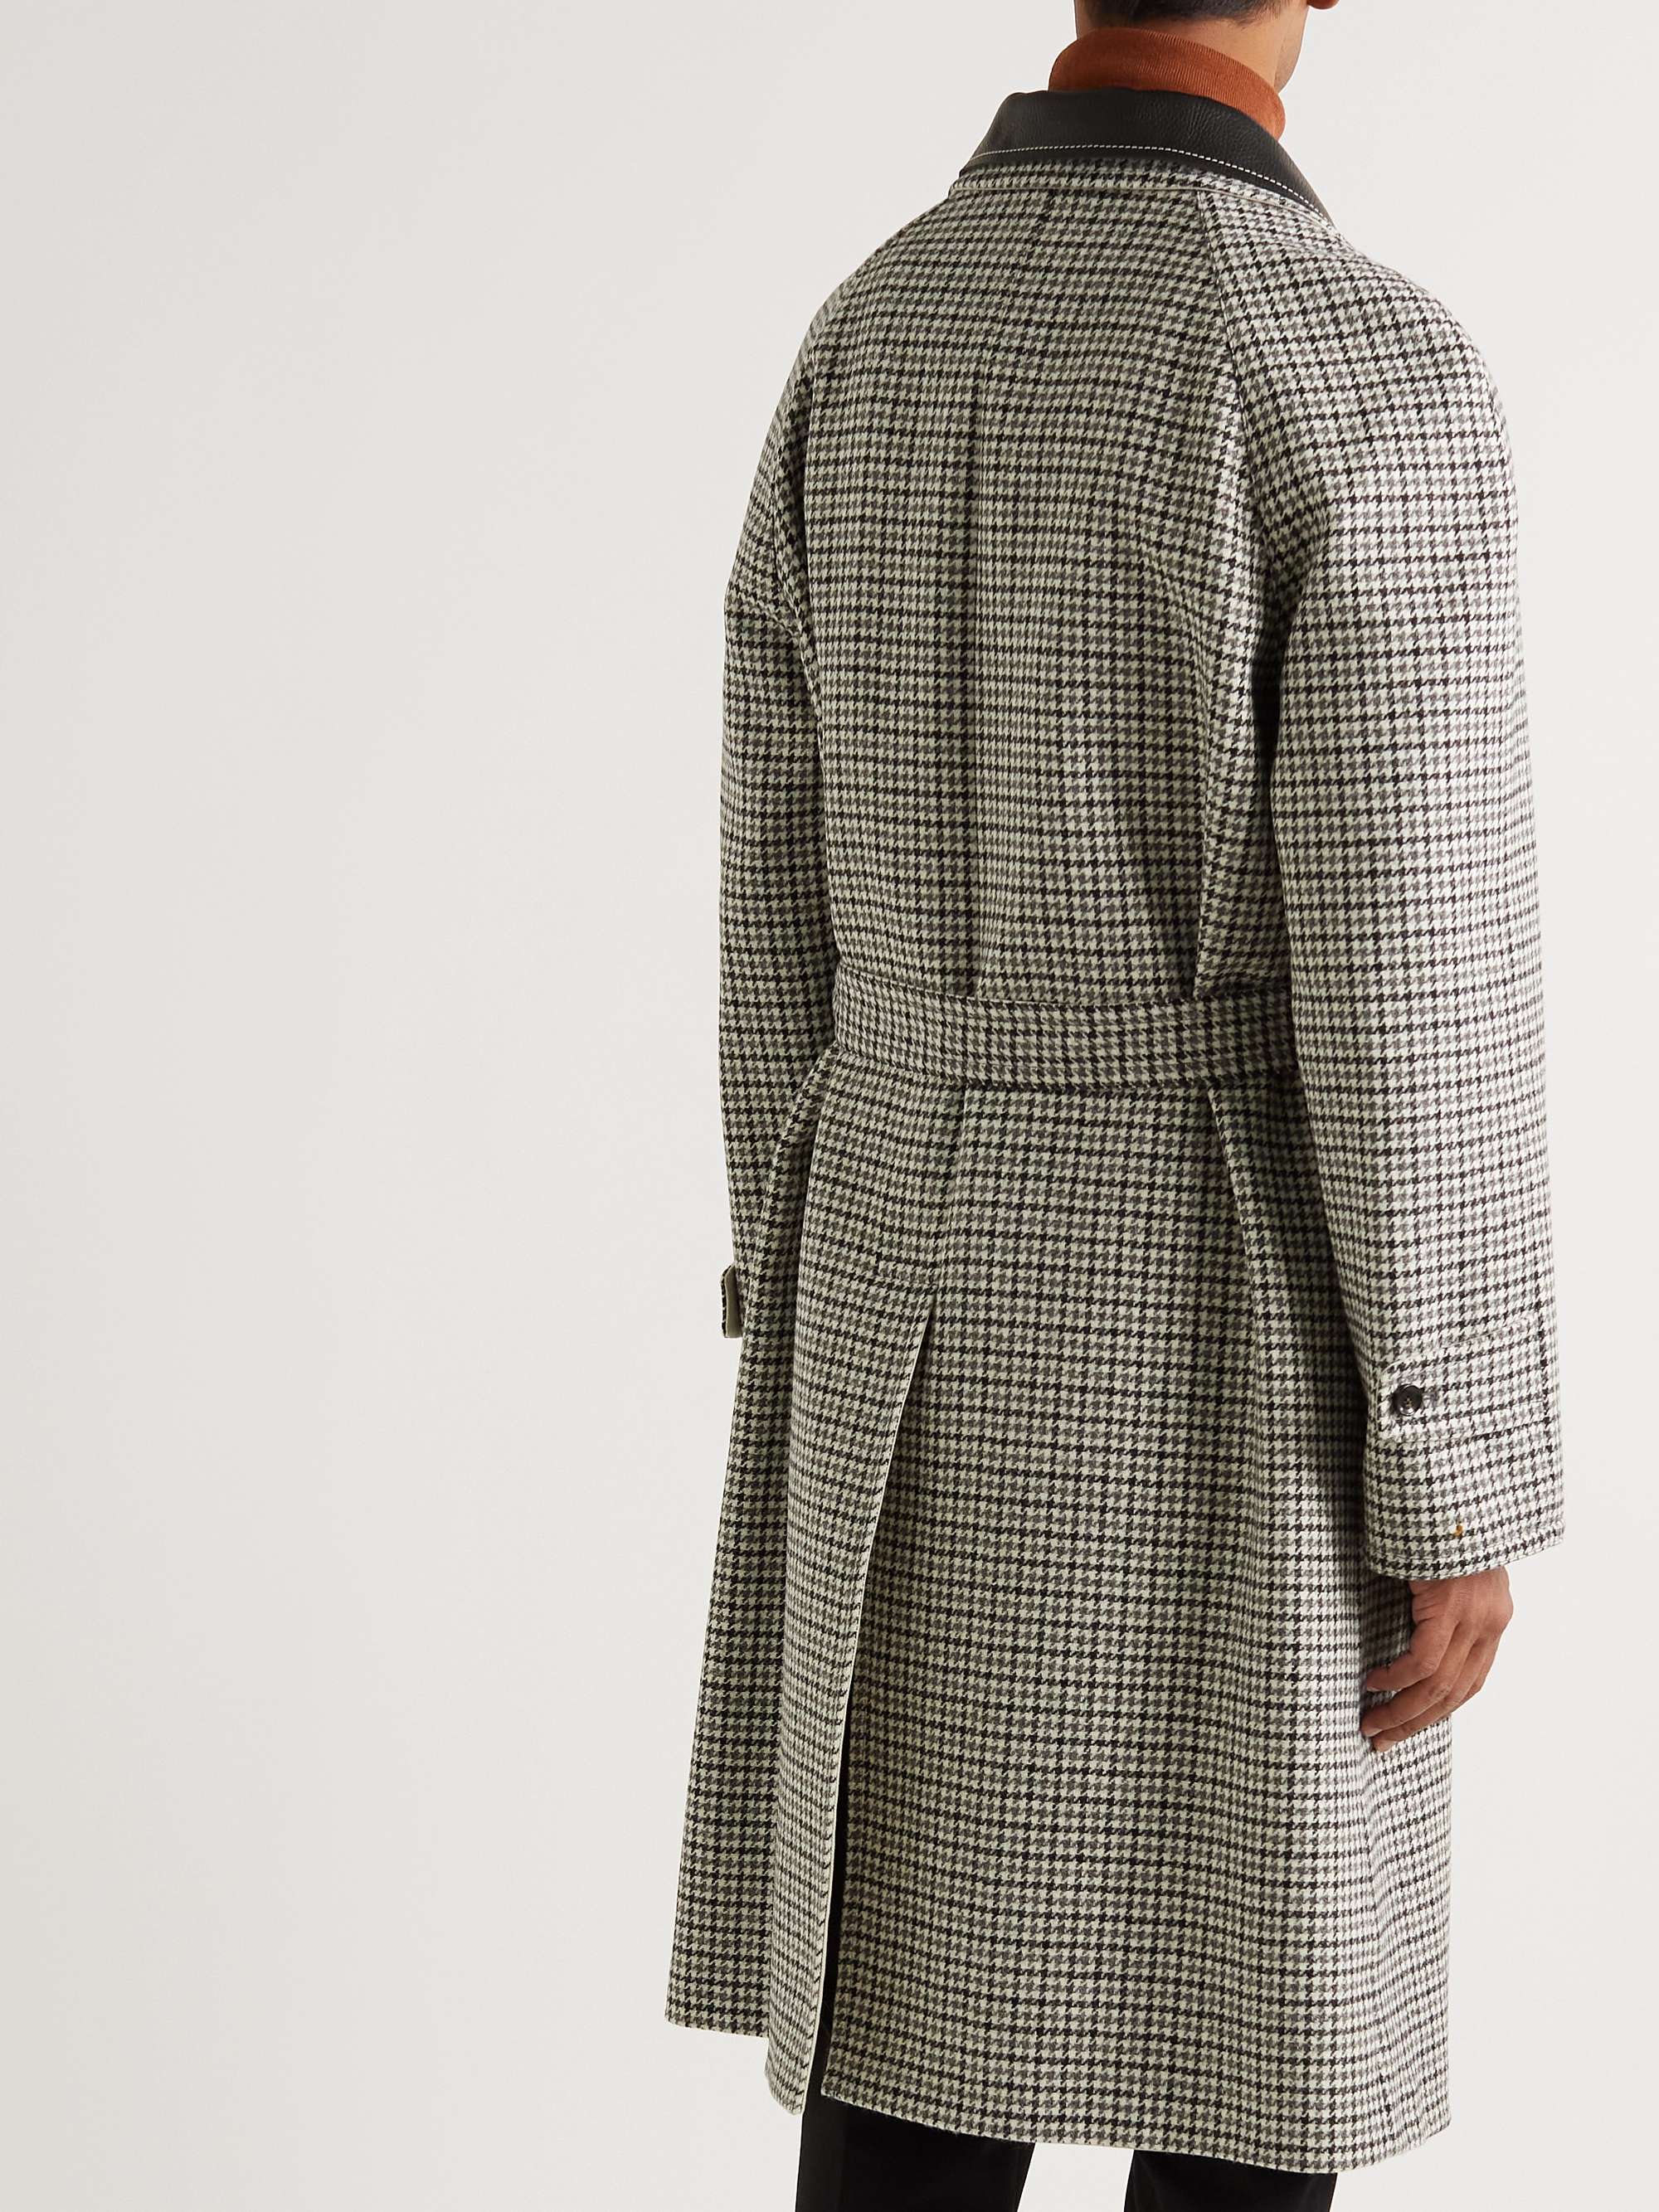 TOD'S Reversible Leather-Trimmed Houndstooth Wool and Cotton-Gabardine Trench Coat